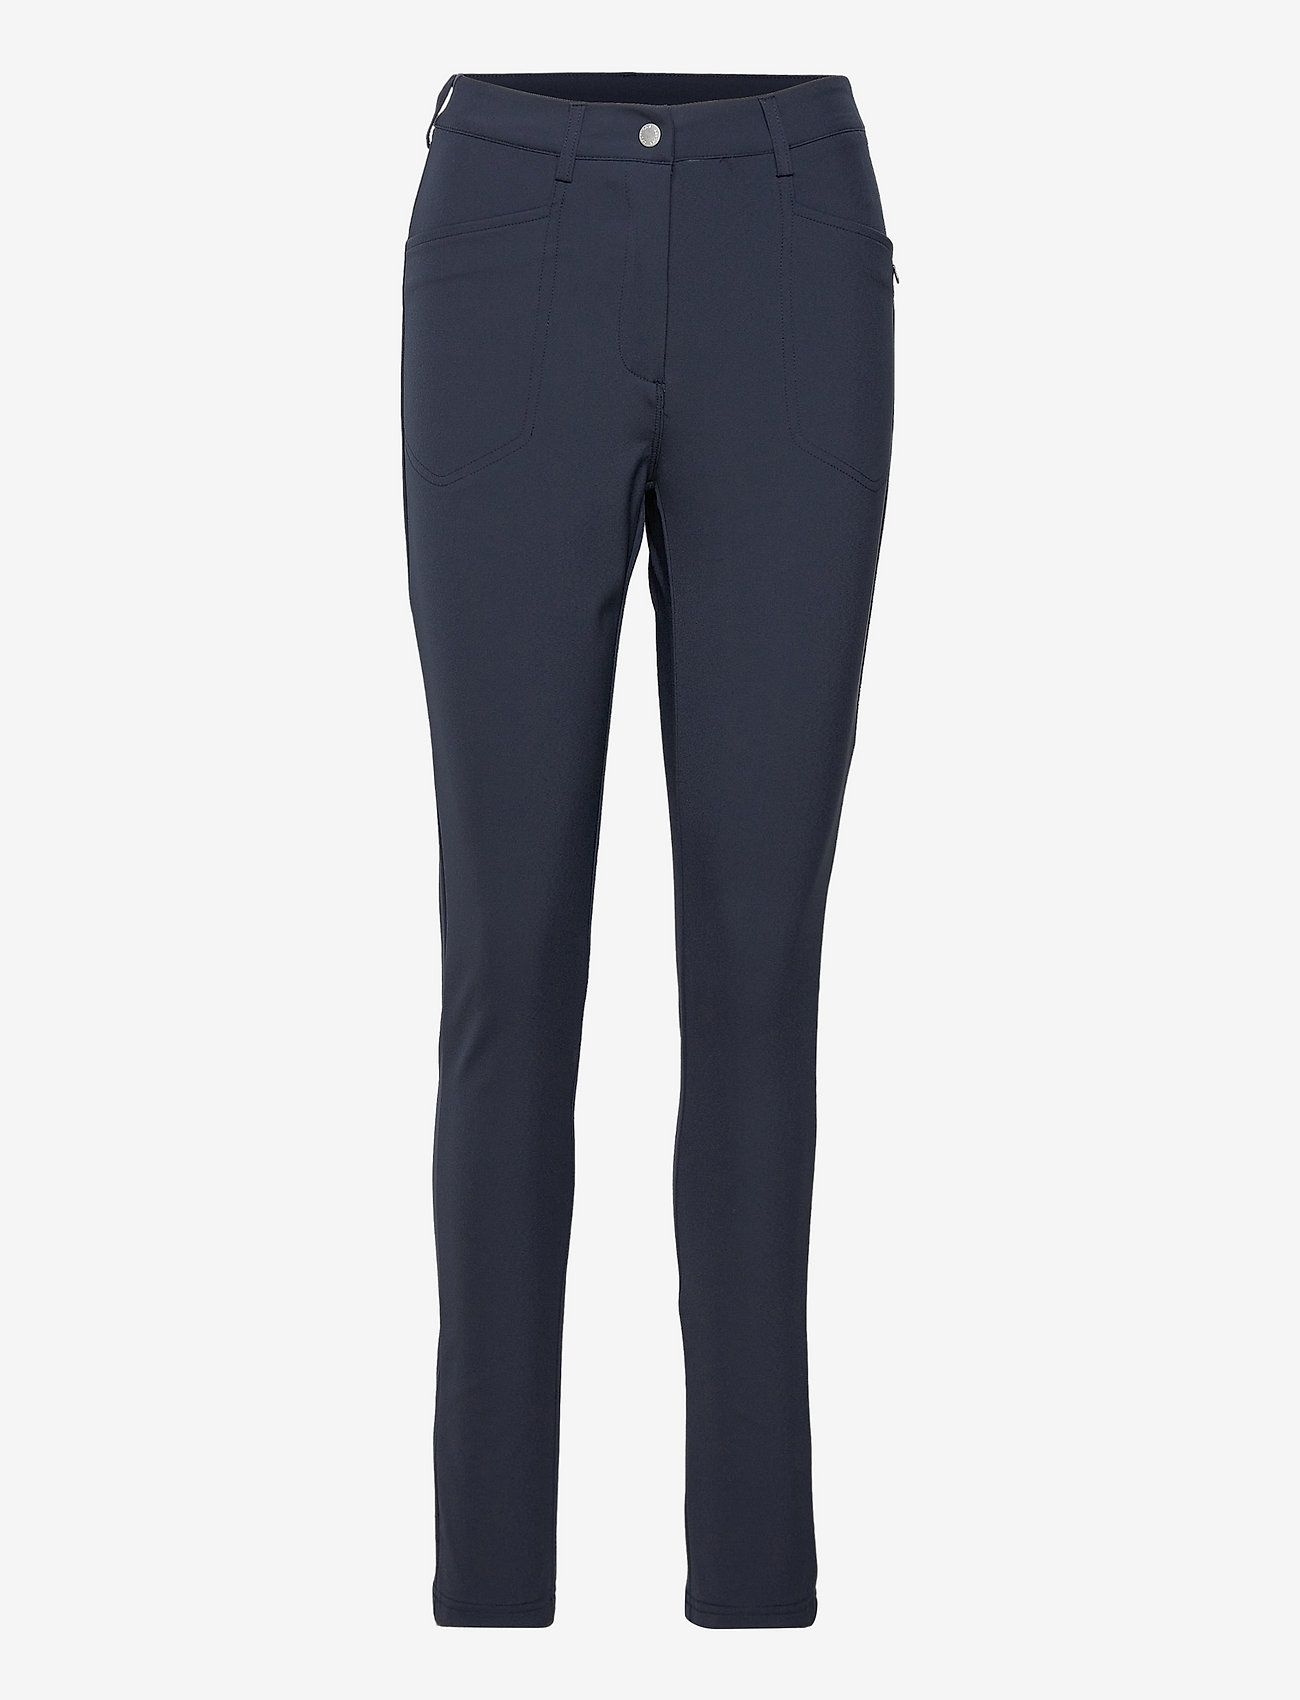 Abacus - Lds Elite trousers - golfbukser - navy - 0